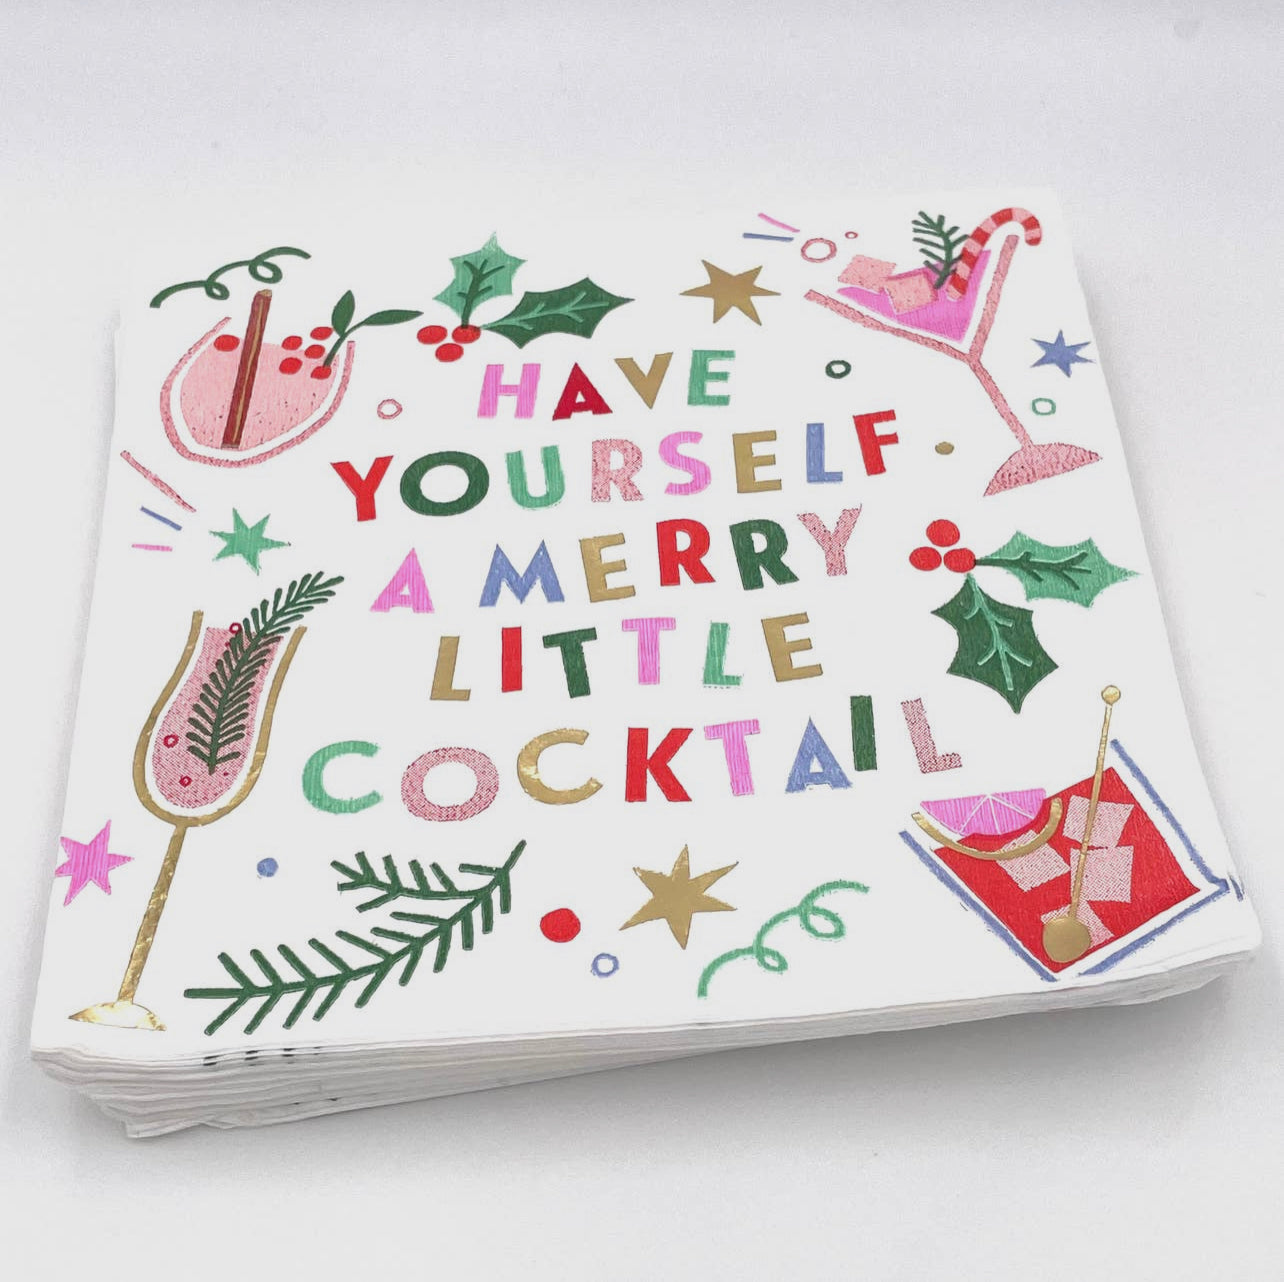 holiday cocktail napkins with a white background featuring different cocktail glasses, holly berries, and stars in festive colors with the words "have yourself a merry little cocktail" in the center and bits of gold foil for accent